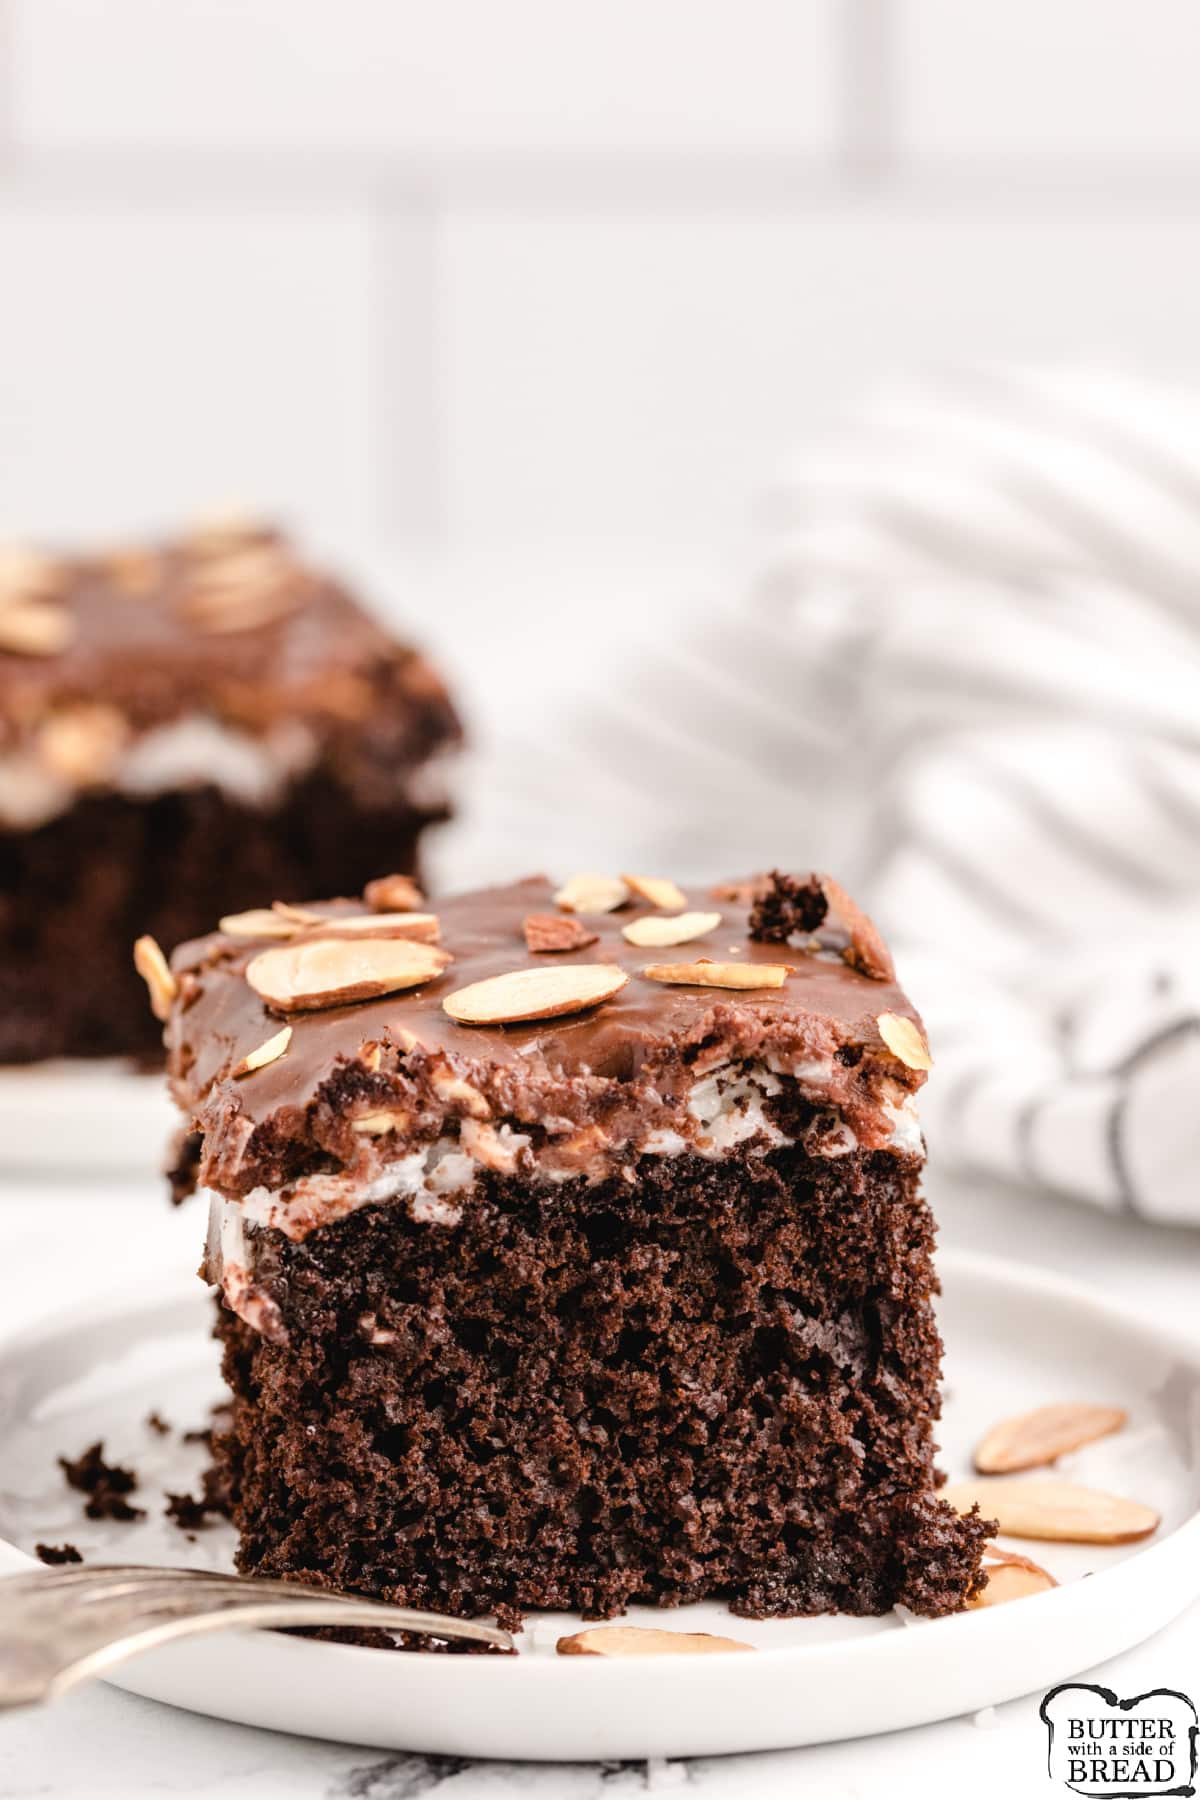 Almond Joy Cake is chocolate cake topped with a marshmallow coconut layer and a chocolate frosting with toasted almonds. Chocolate cake recipe that tastes just like your favorite Almond Joy candy bar! 